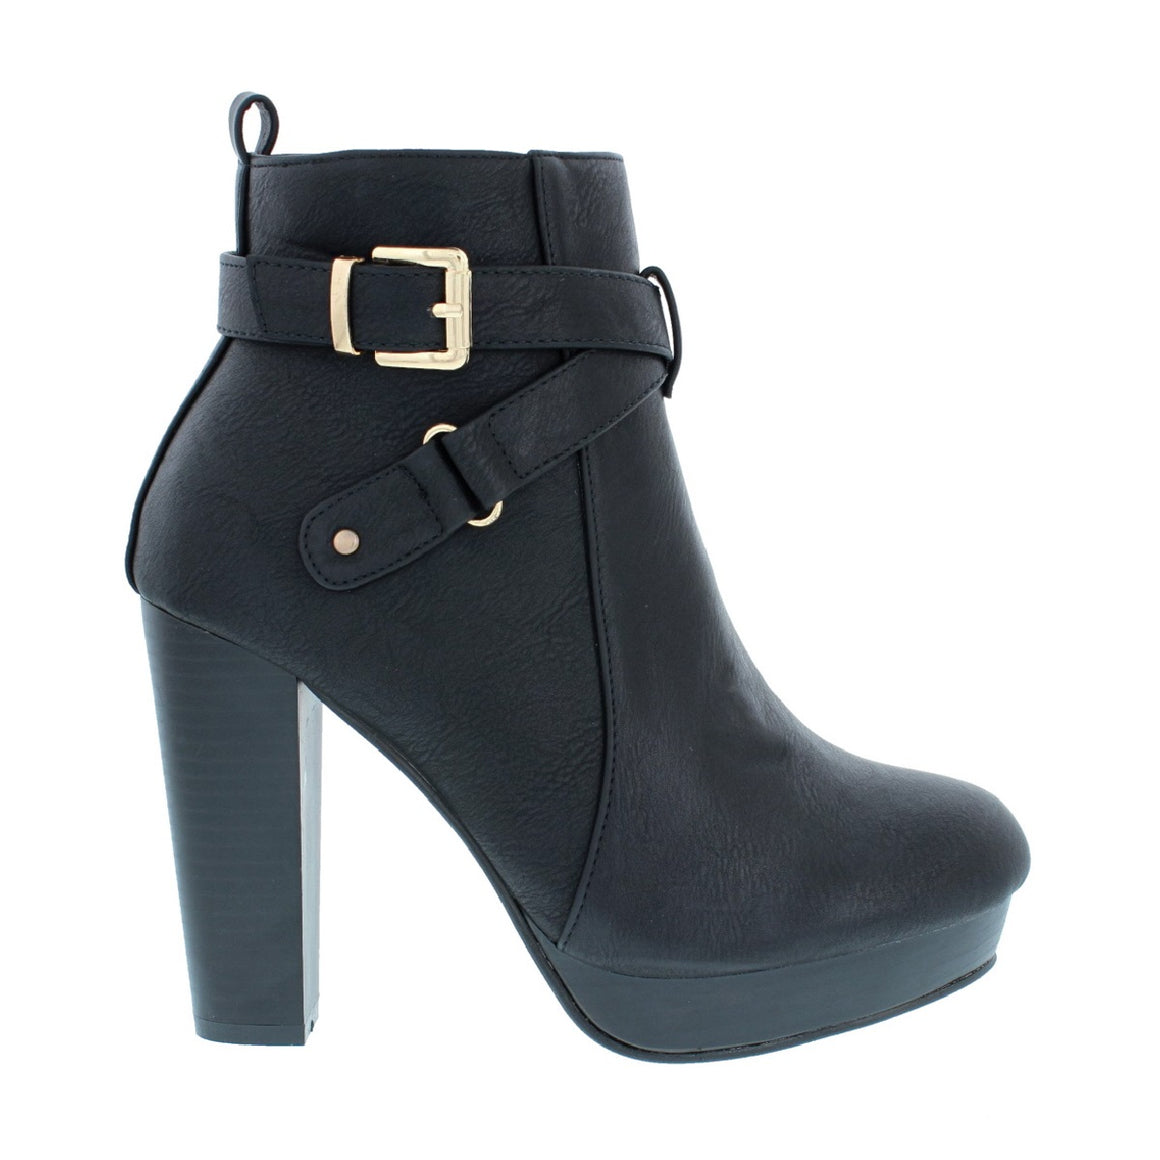 Buckled Cross Strap Ankle Bootie (BLACK)